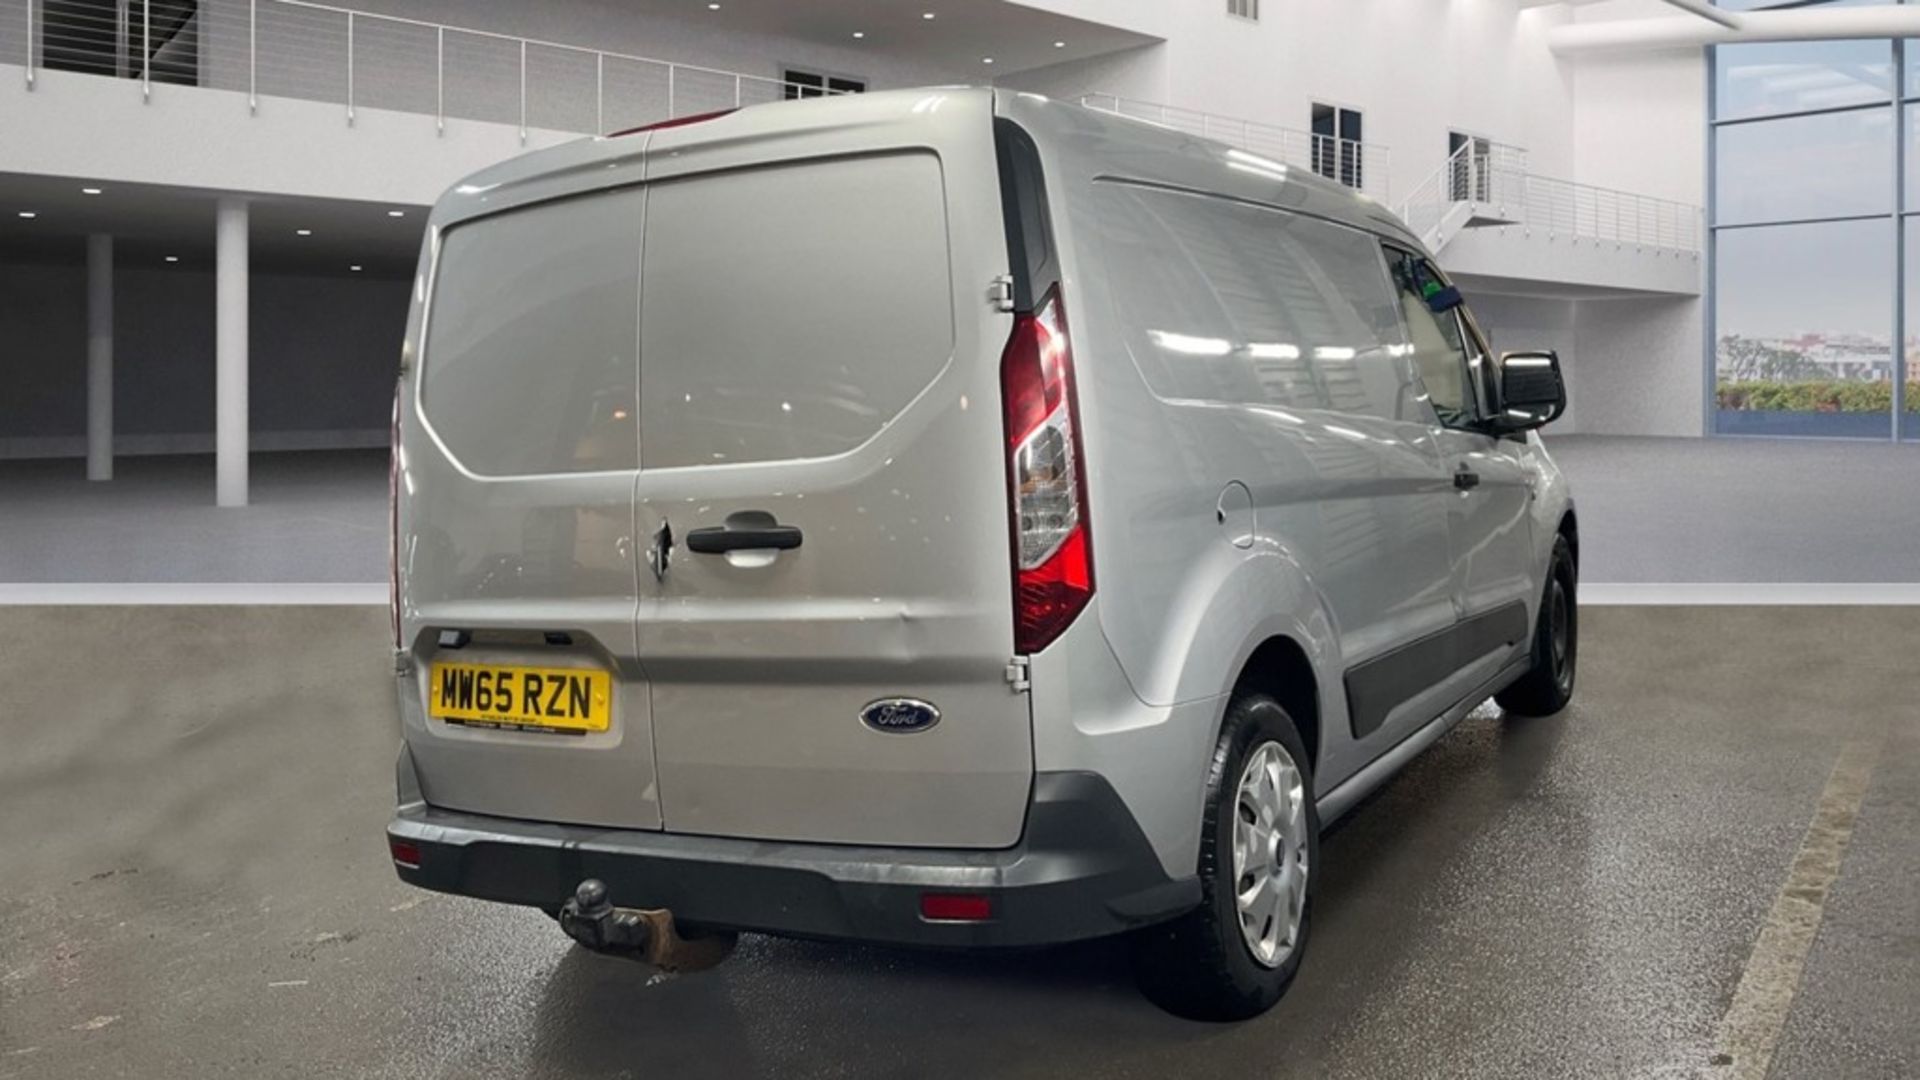 **ON SALE ** Ford Transit Connect 1.6 TDCI 95 240 L2H1 2015 -65 Reg' -Bluetooth Handsfree -Tow Bar - Image 6 of 9